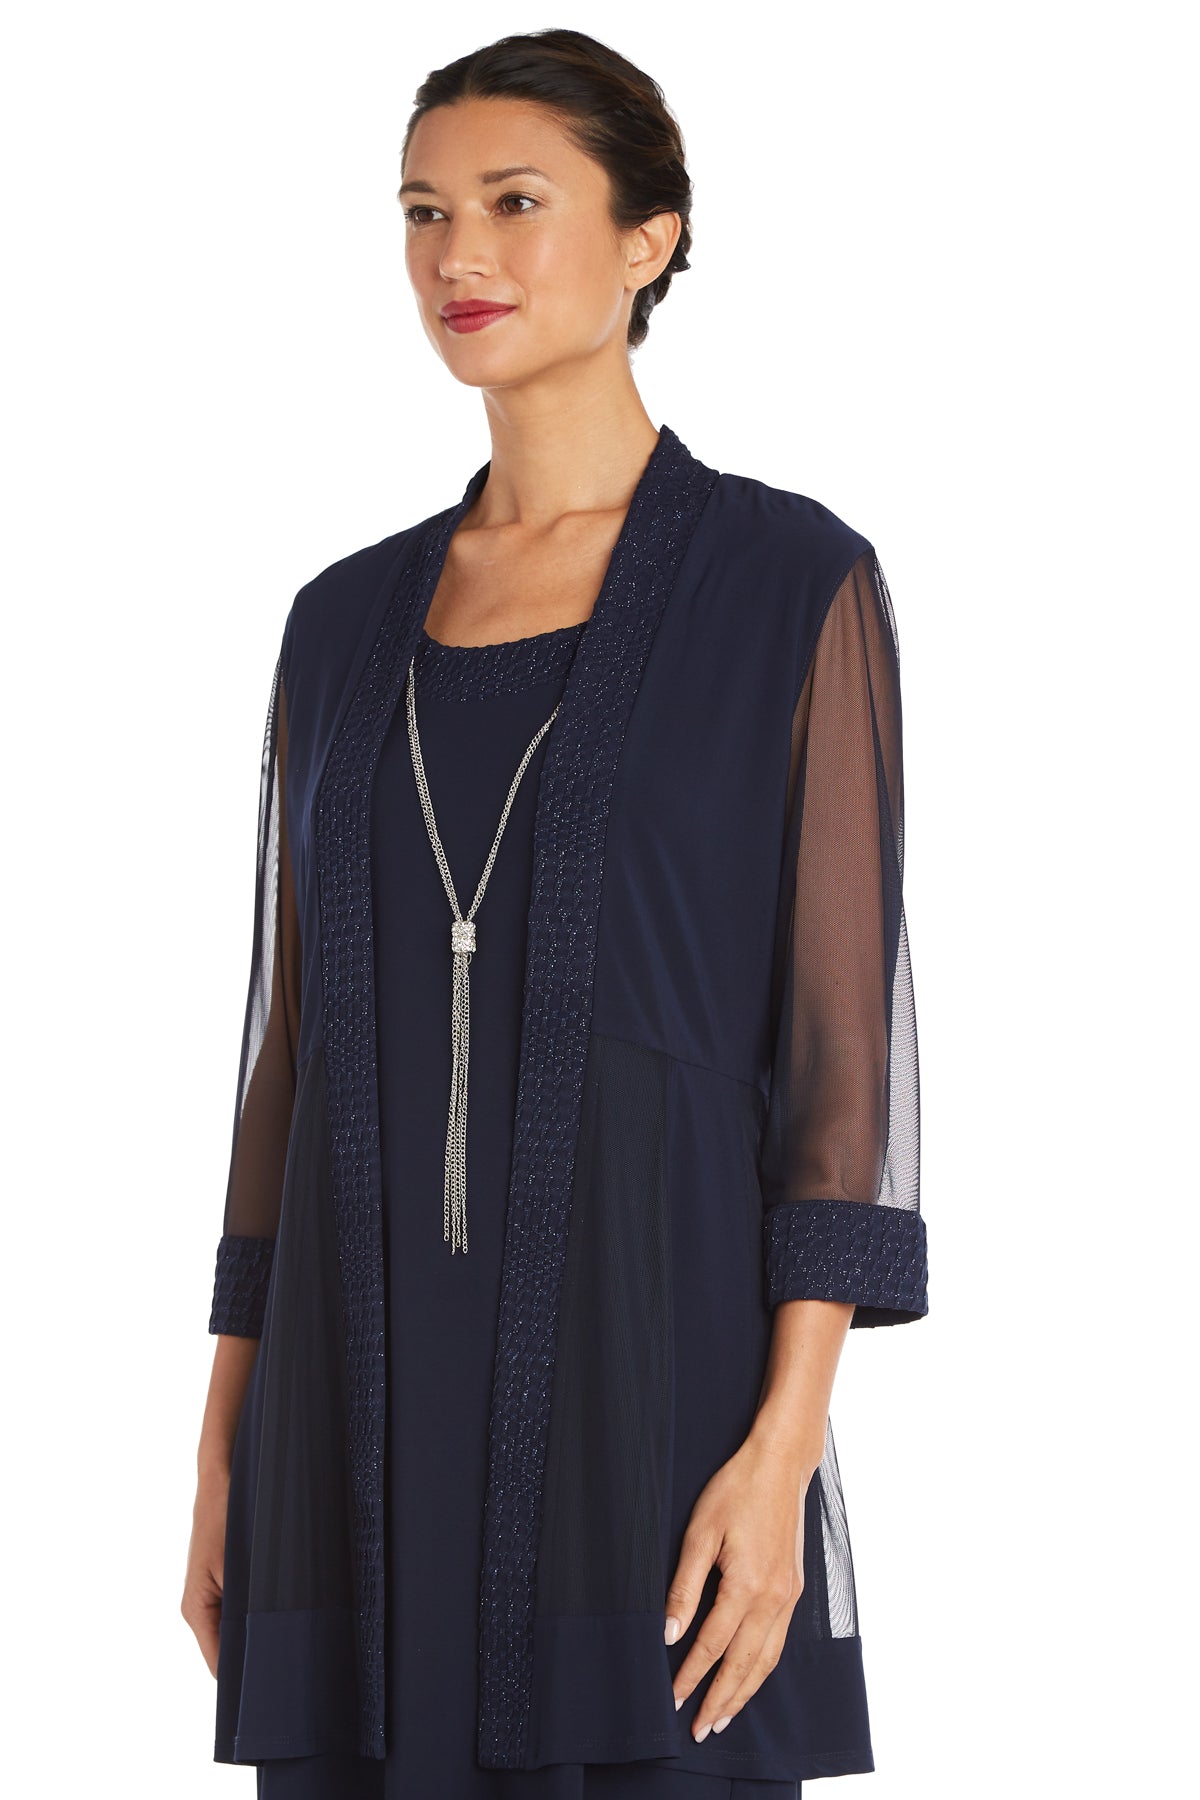 Jacket Dress with Textured Detail and Sheer Inserts - Petite – R&M Richards